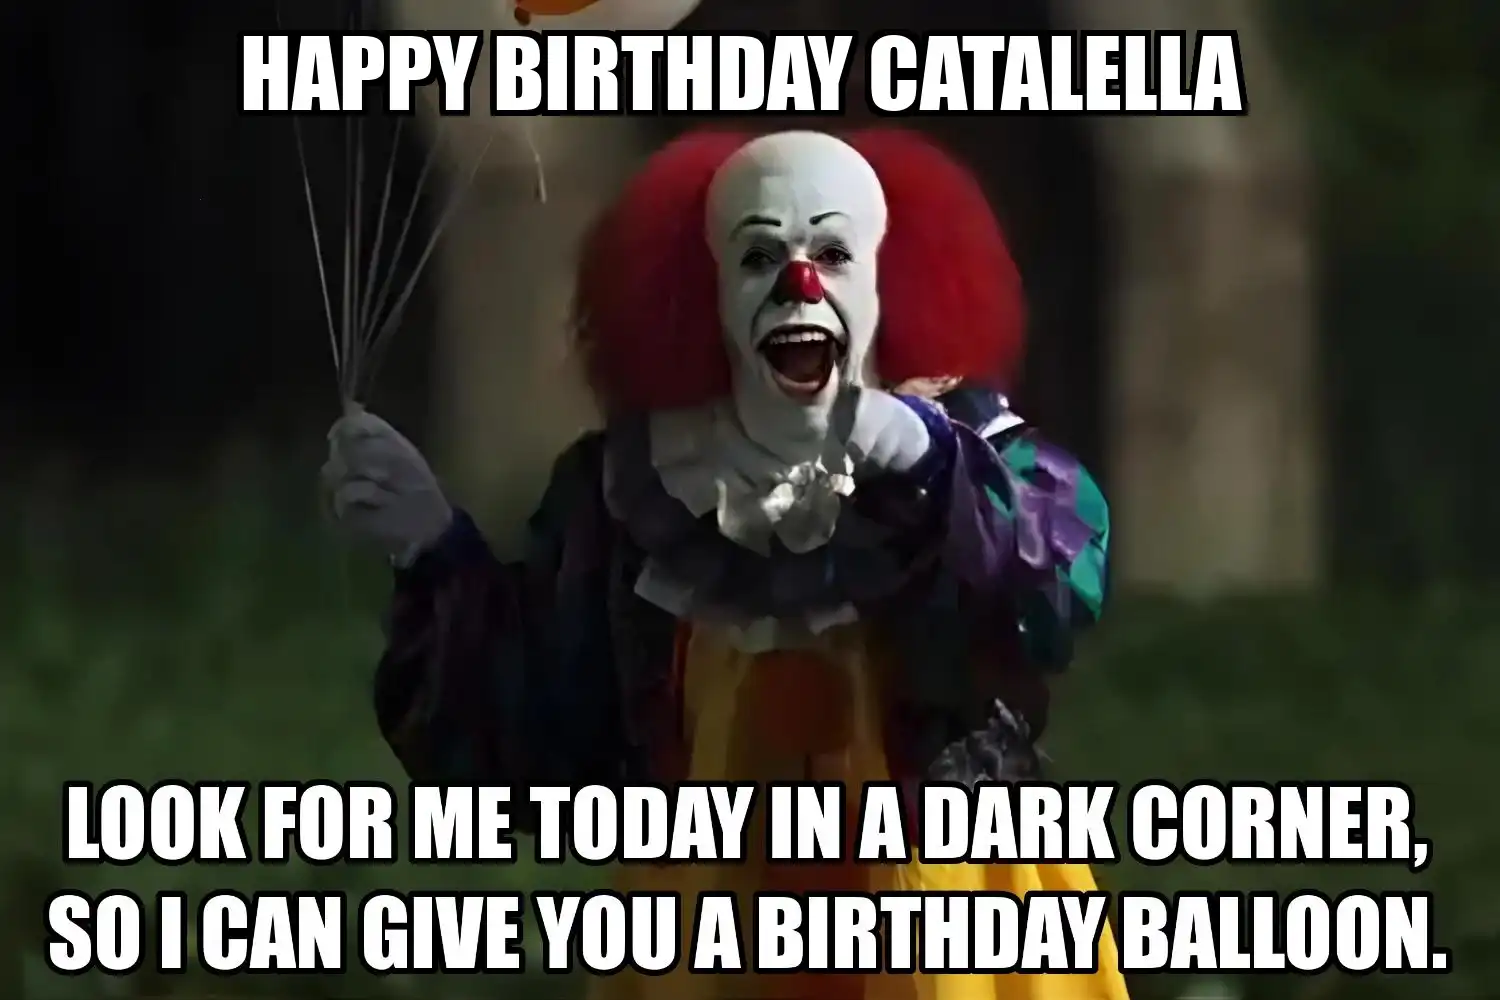 Happy Birthday Catalella I Can Give You A Balloon Meme